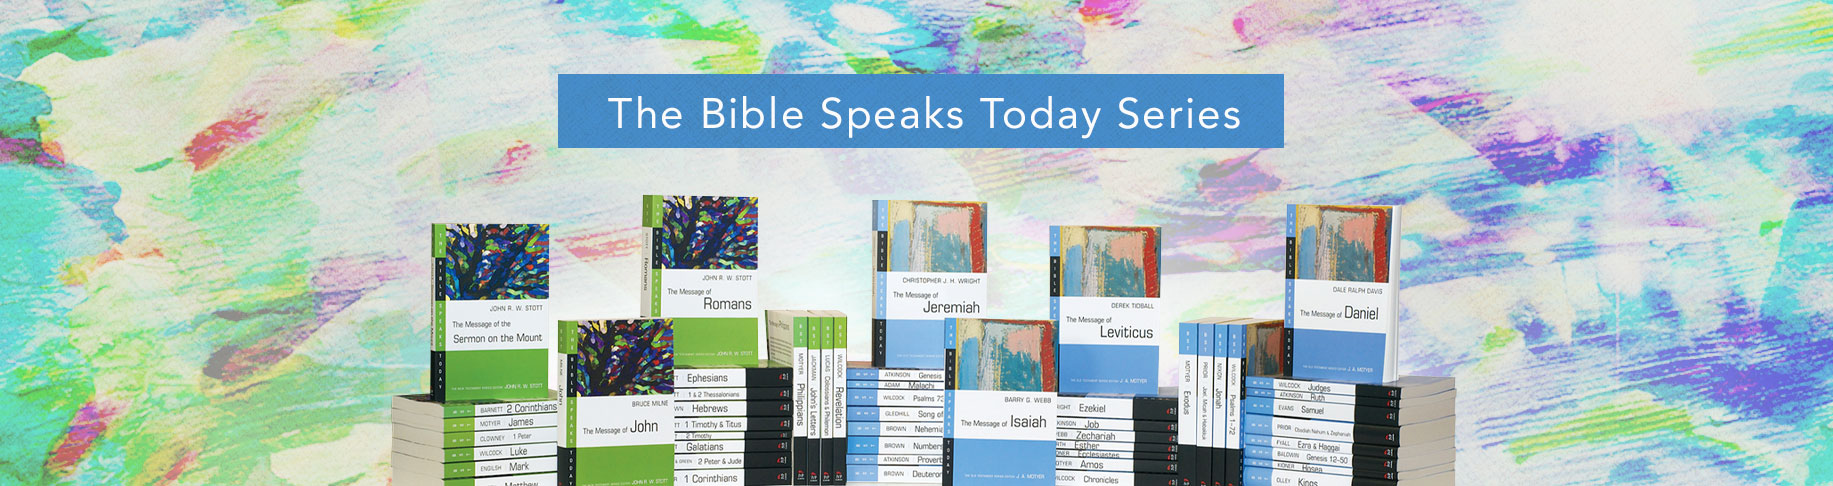 The Bible Speaks Today Series